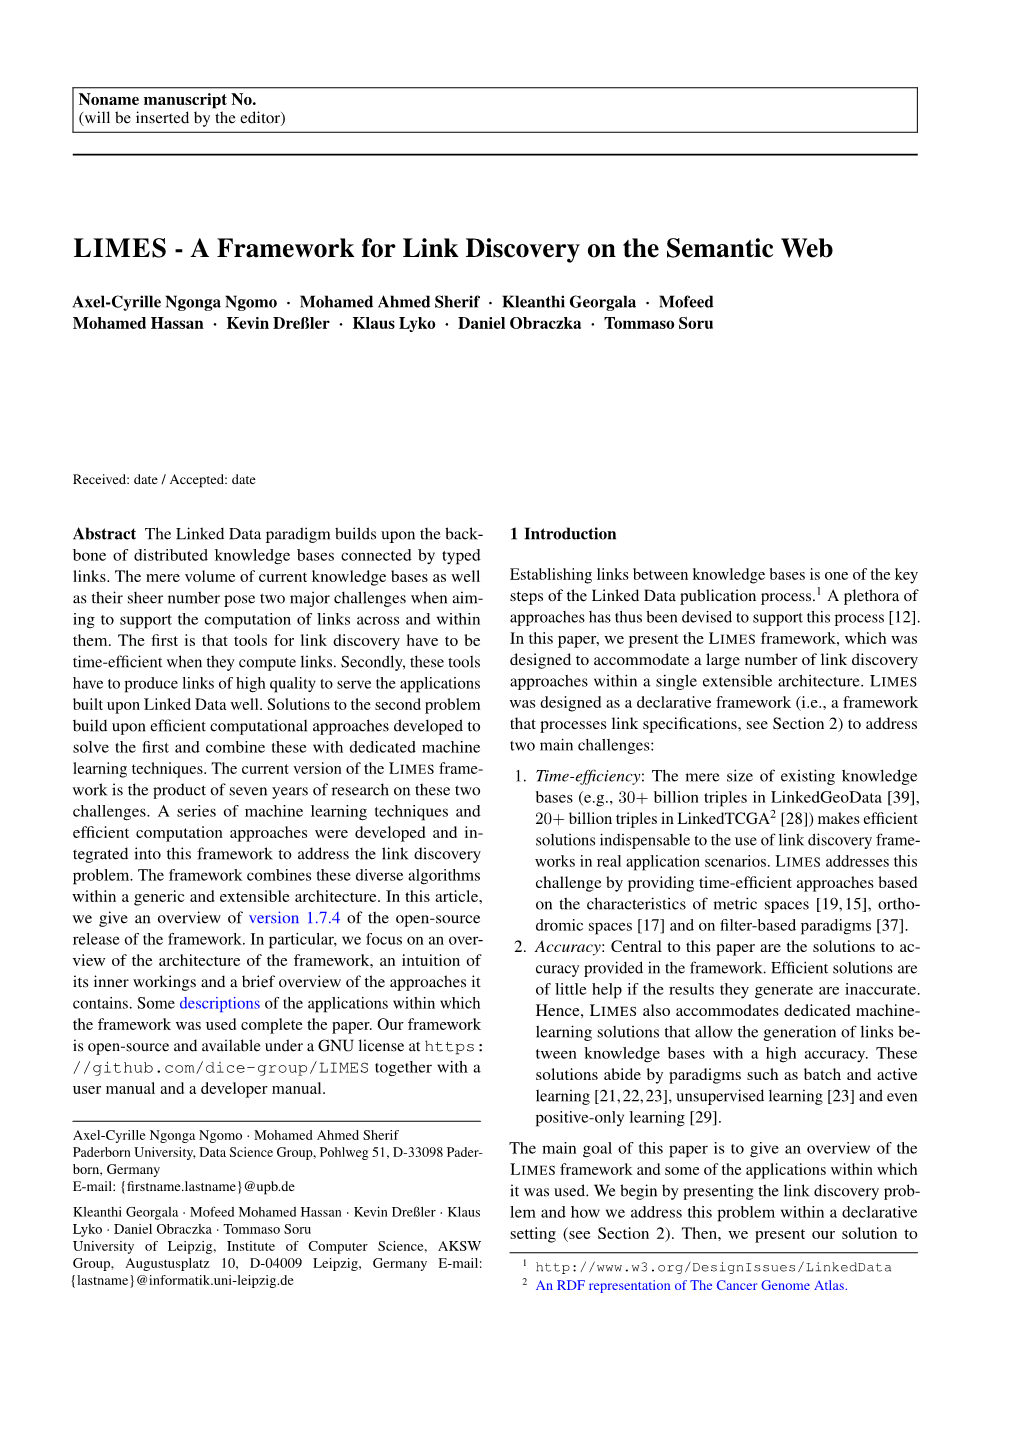 LIMES - a Framework for Link Discovery on the Semantic Web